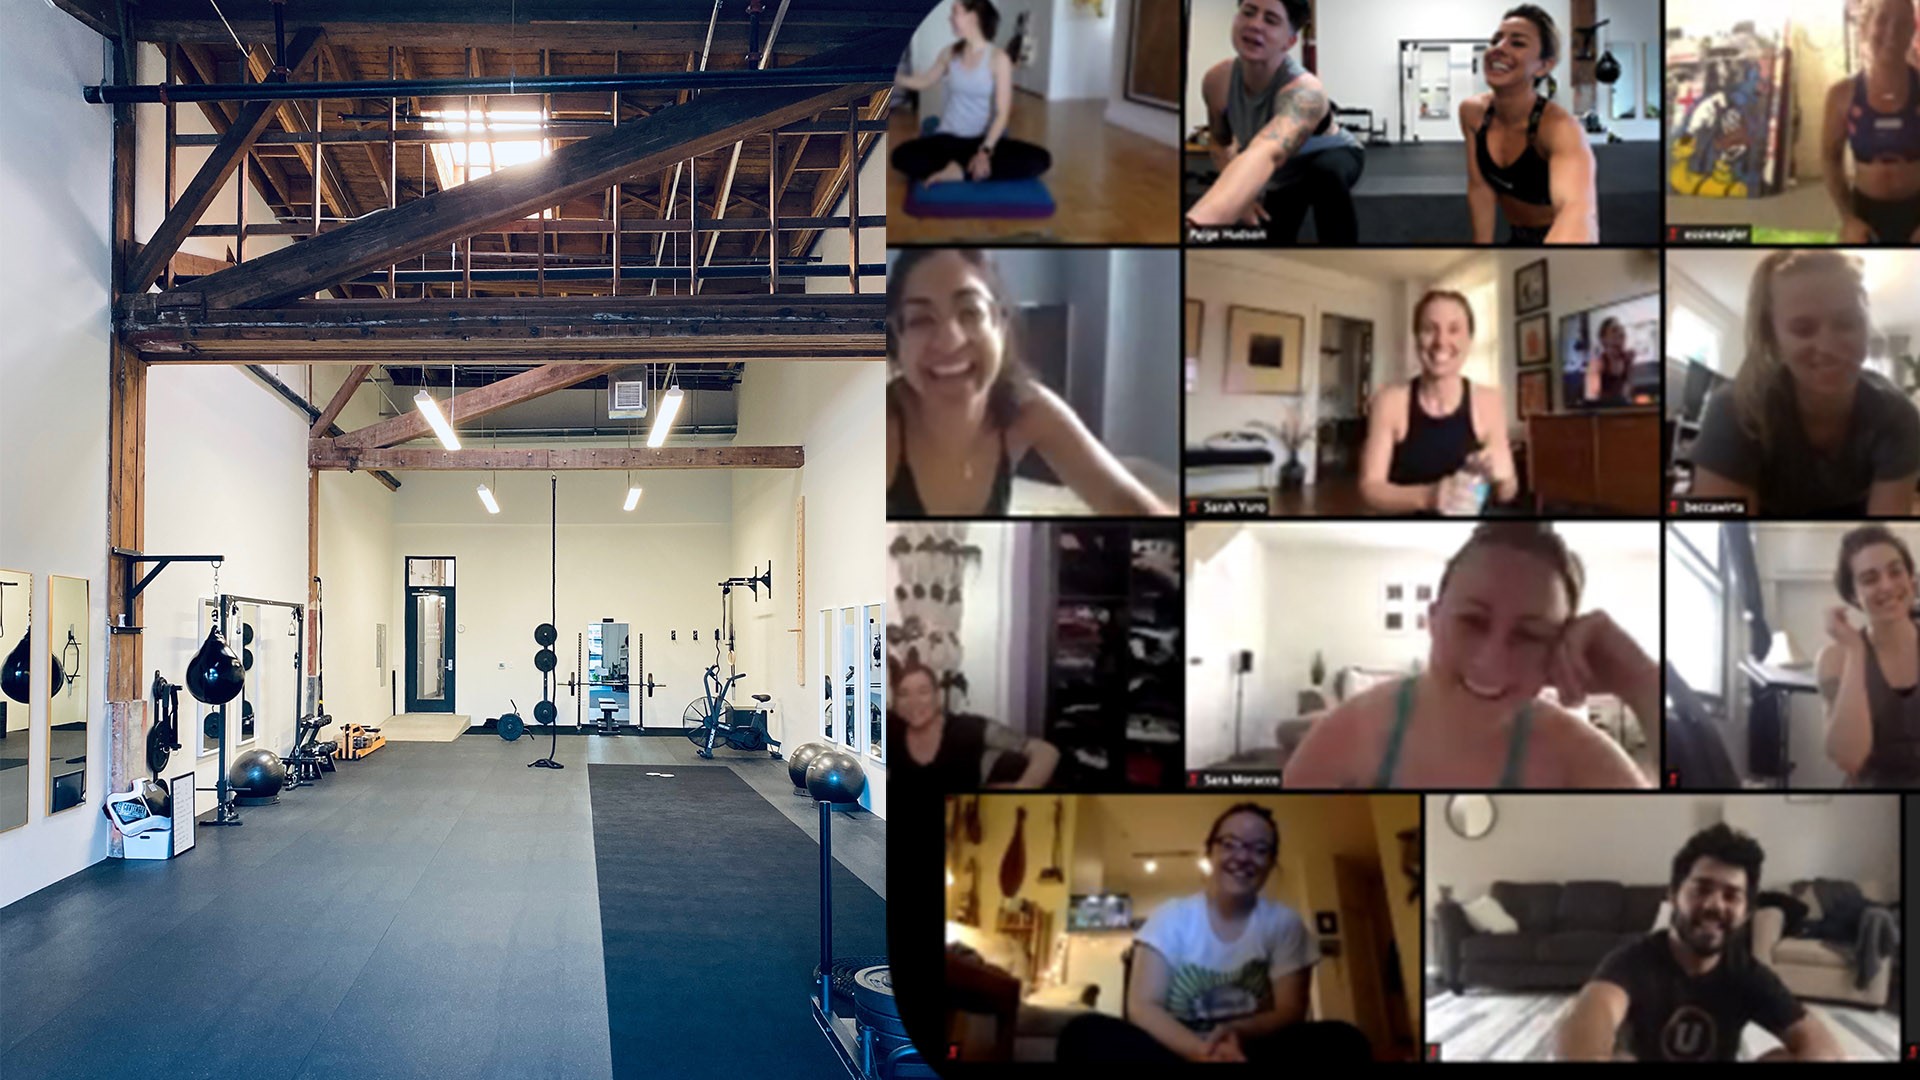 Emma Middlebrook, a Portland-based trainer, has been using virtual classes to create a safe workout space for people of all levels.